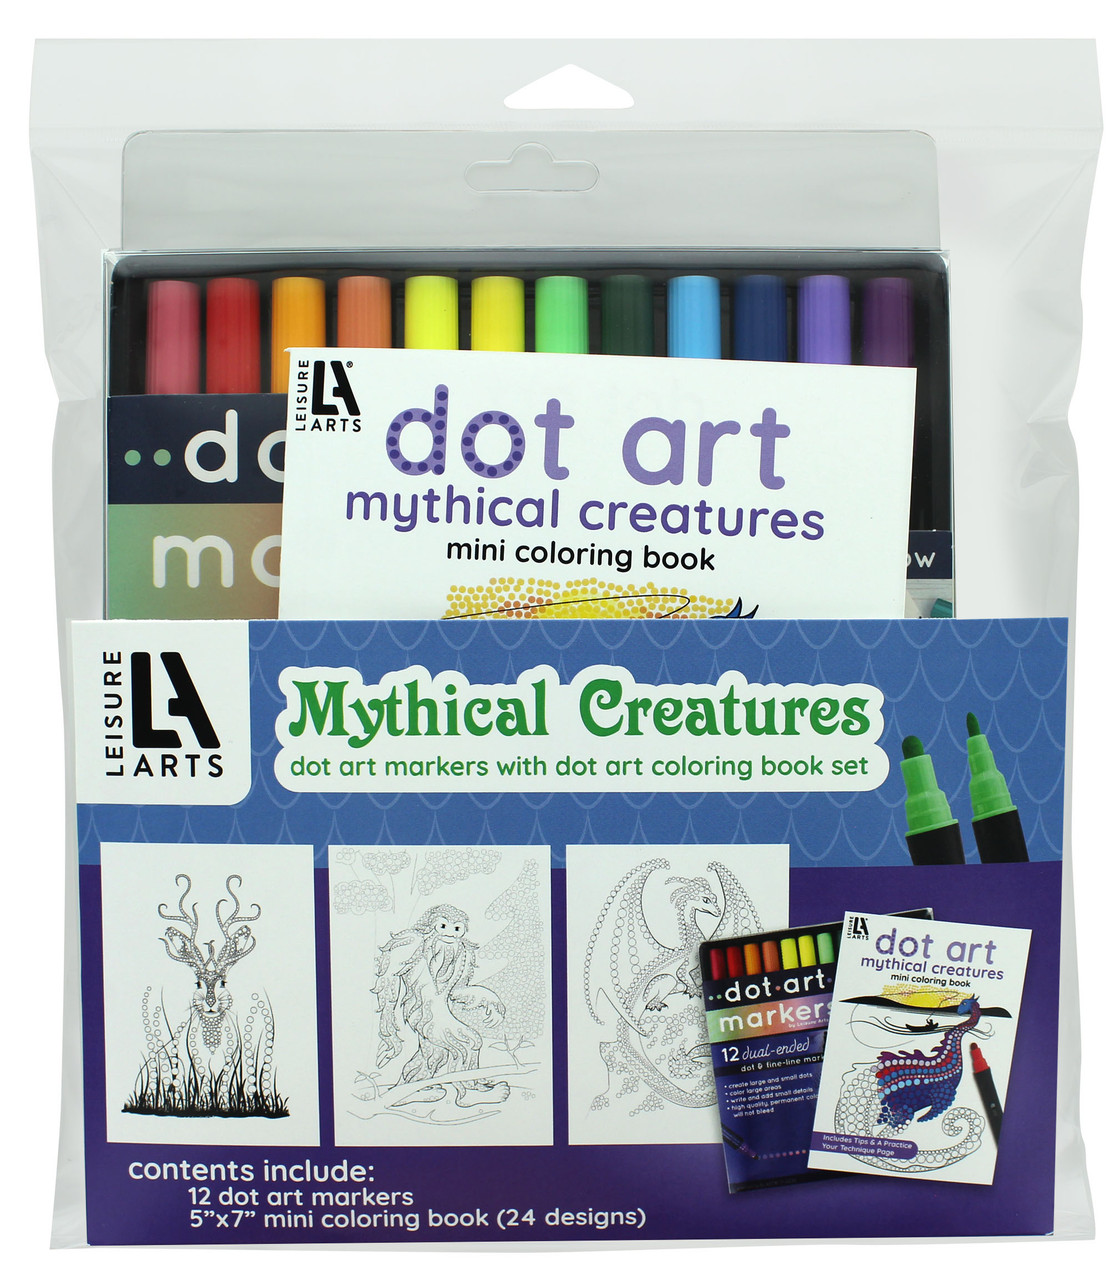 Leisure Arts Dot Art Mini Coloring Book 5x 7 Mythical With Markers 13pc -  Leisure Arts